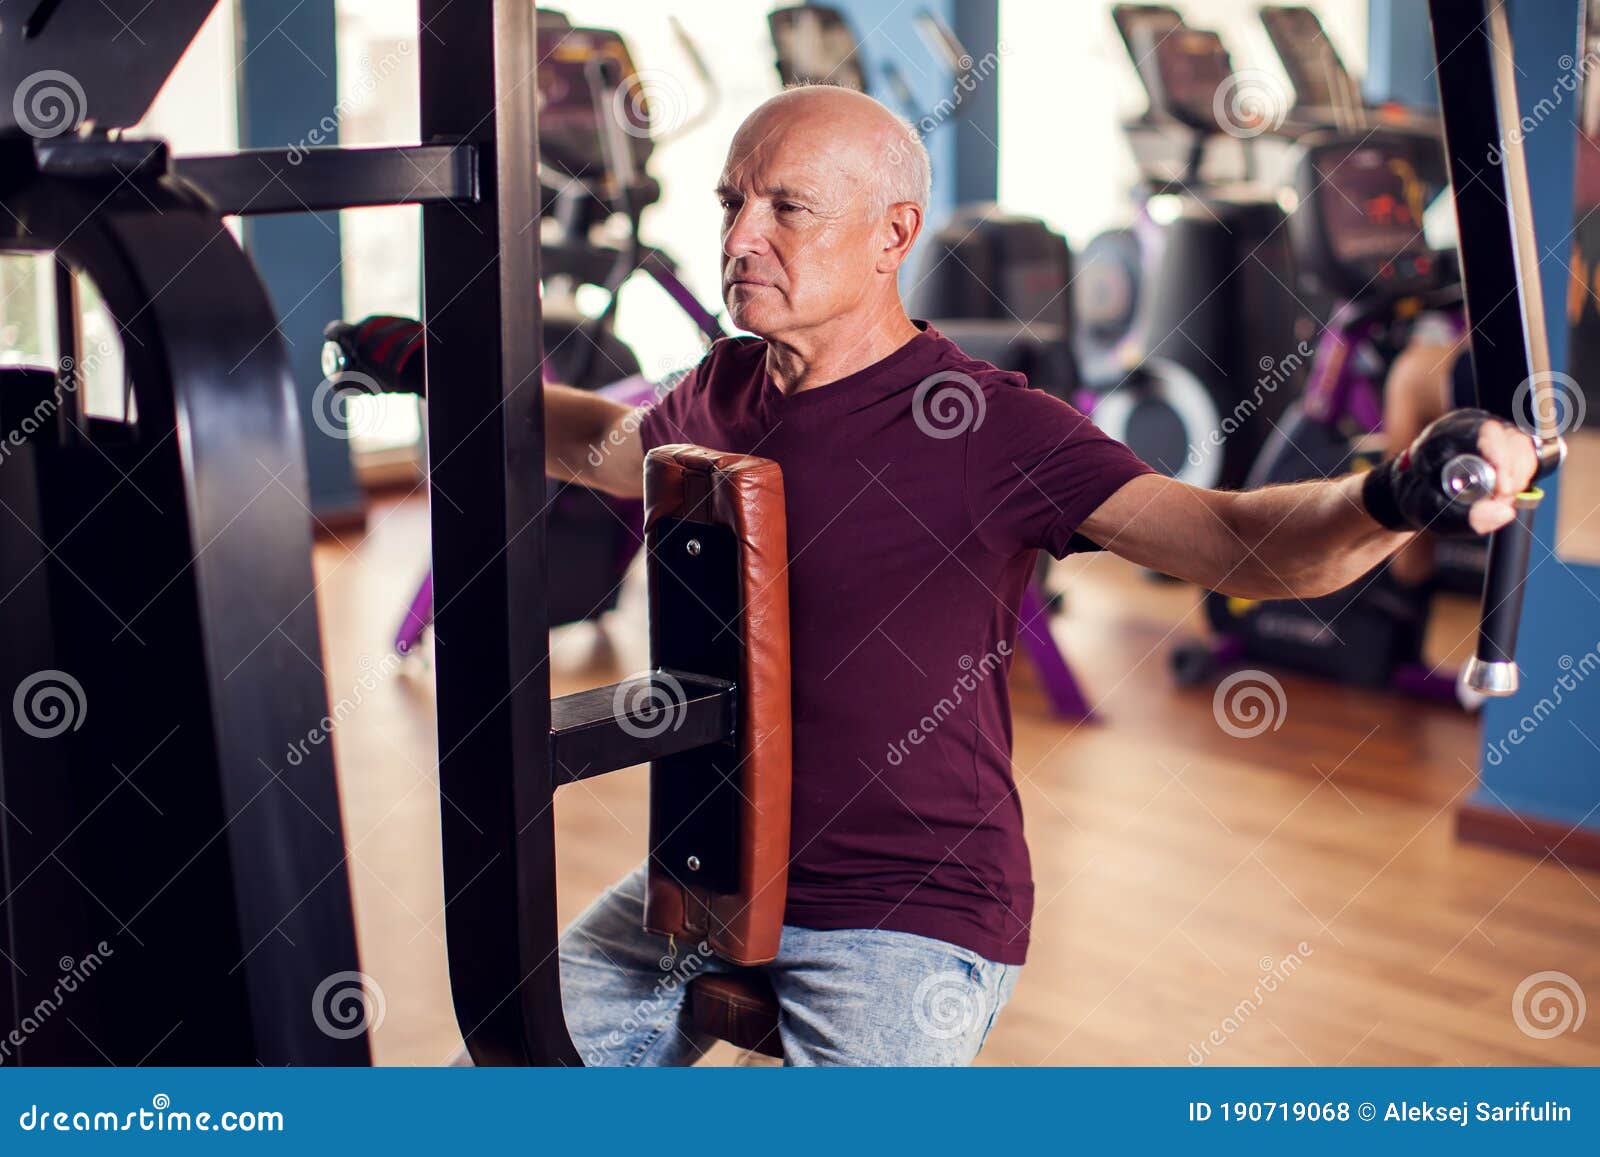 A Portrait of Senior Man in the Gym Training Back Muscles. People ...